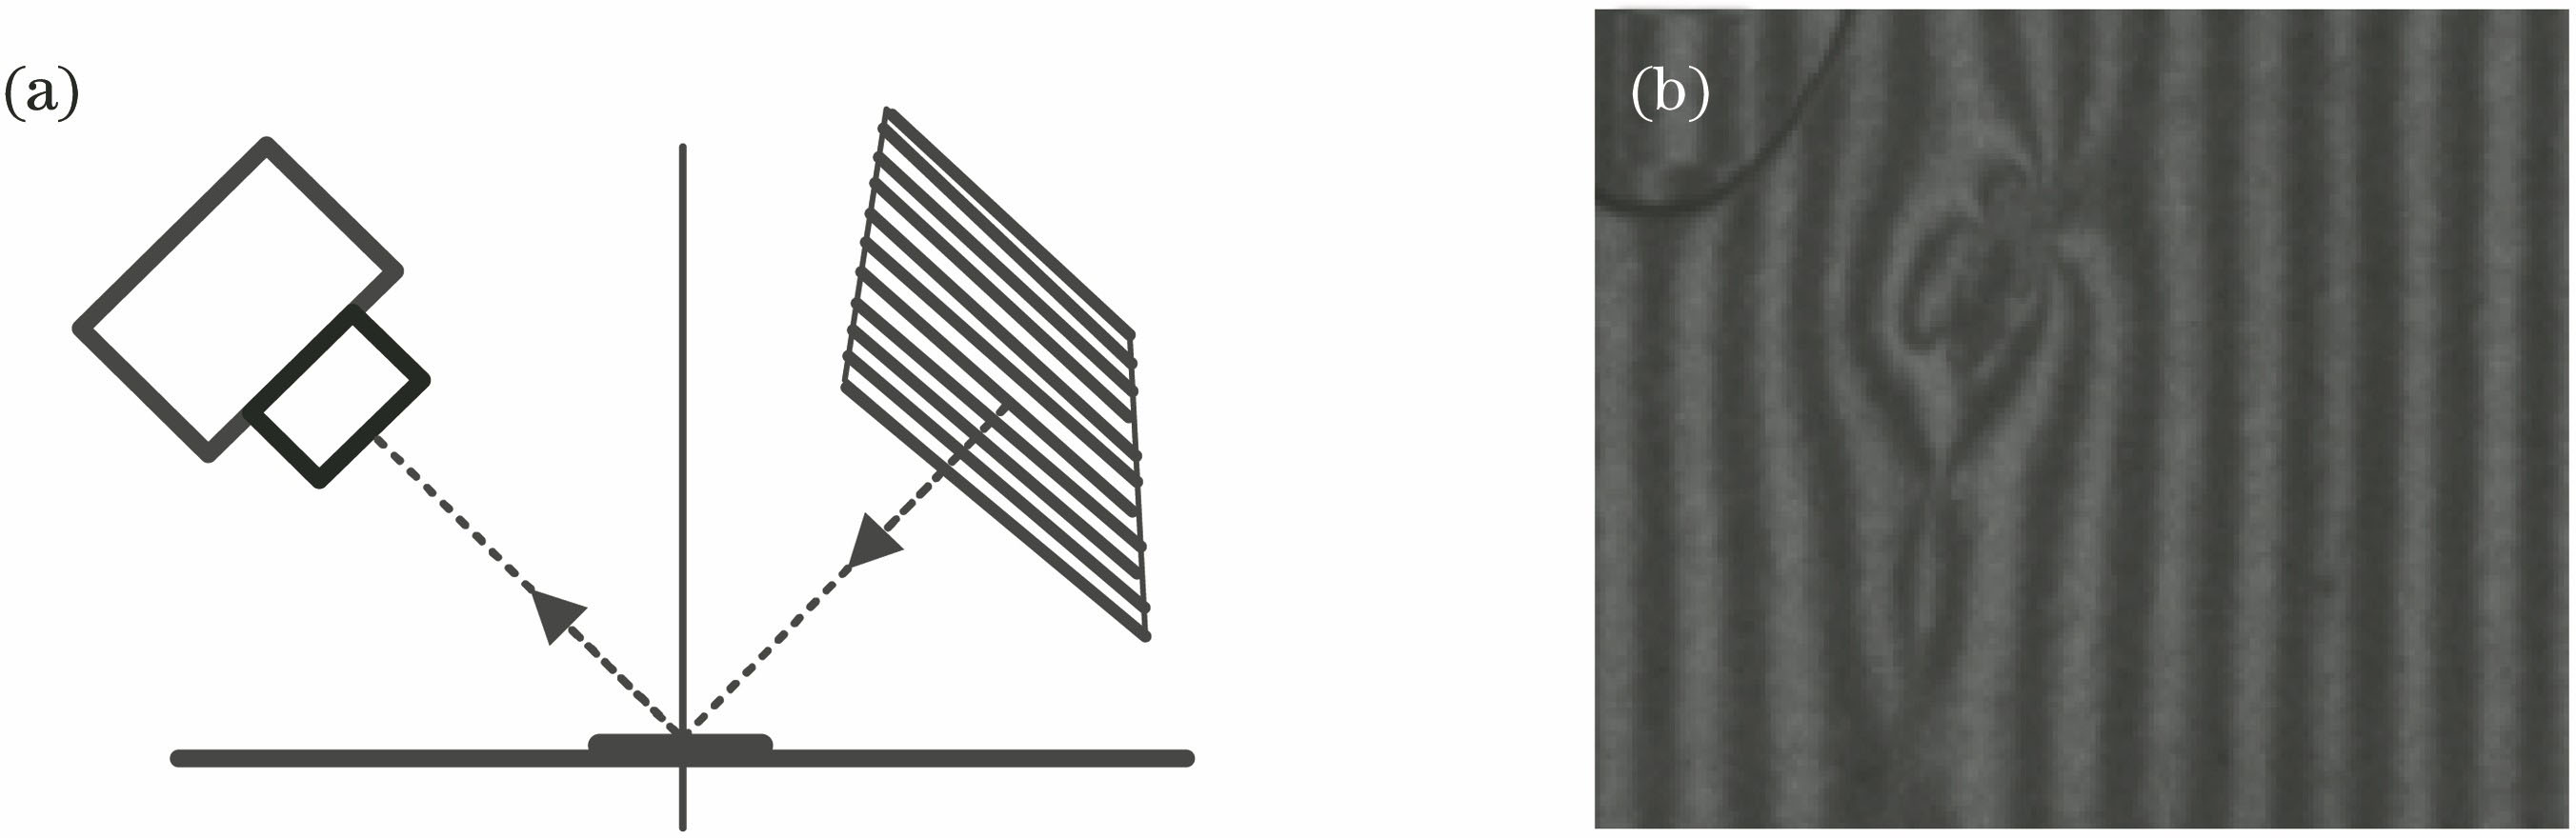 (a) Schematic drawing of reflection stripe detection device; (b) diagram of distortion stripes